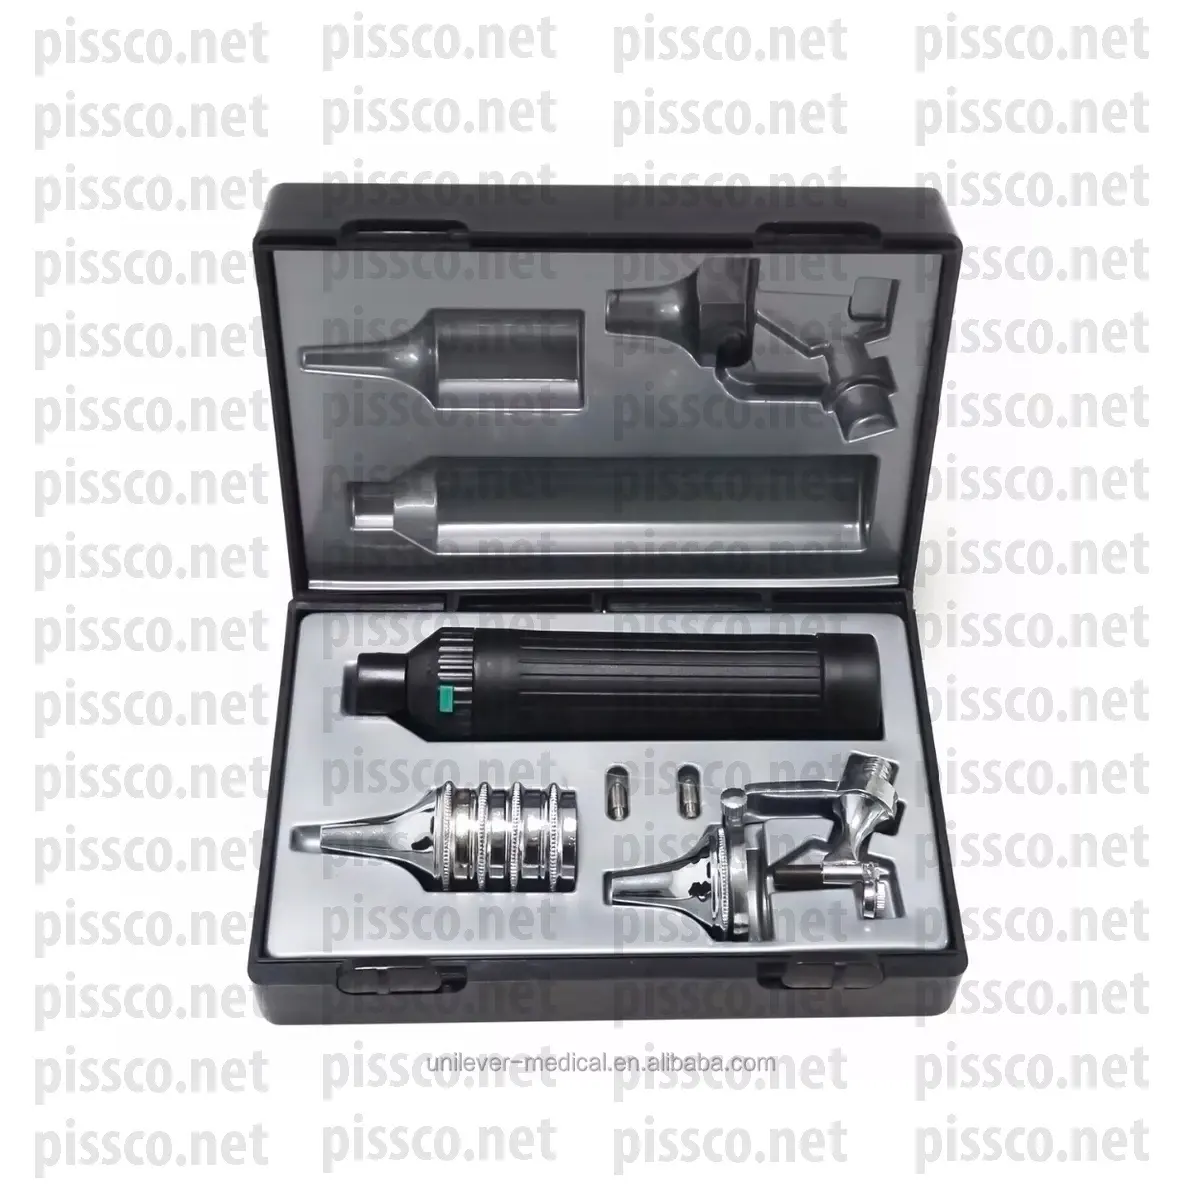 Pet Veterinary Otoscope & Ophthalmoscope Set Microscope Endoscope ENT Surgical Examination for Animal Diagnostic Instruments